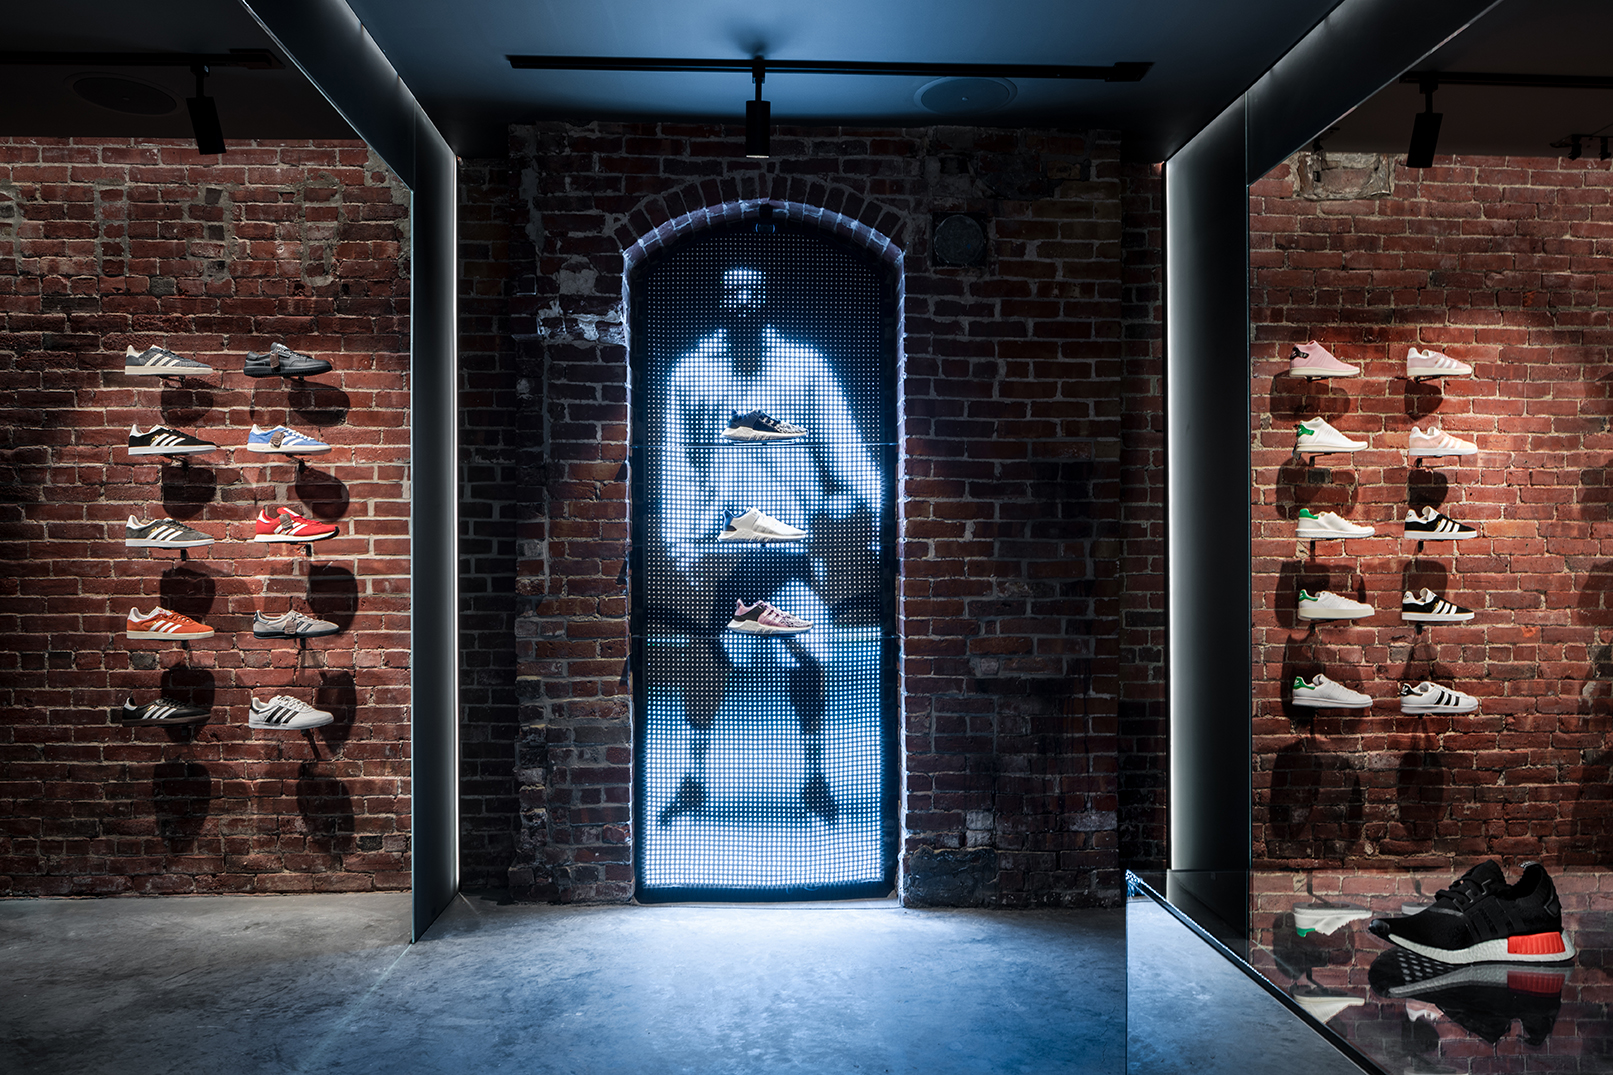 A LED curtain depicting a low resolution, half-tone image of a basketball player, set in an alcove in a brick wall that doubles as a shoe display.